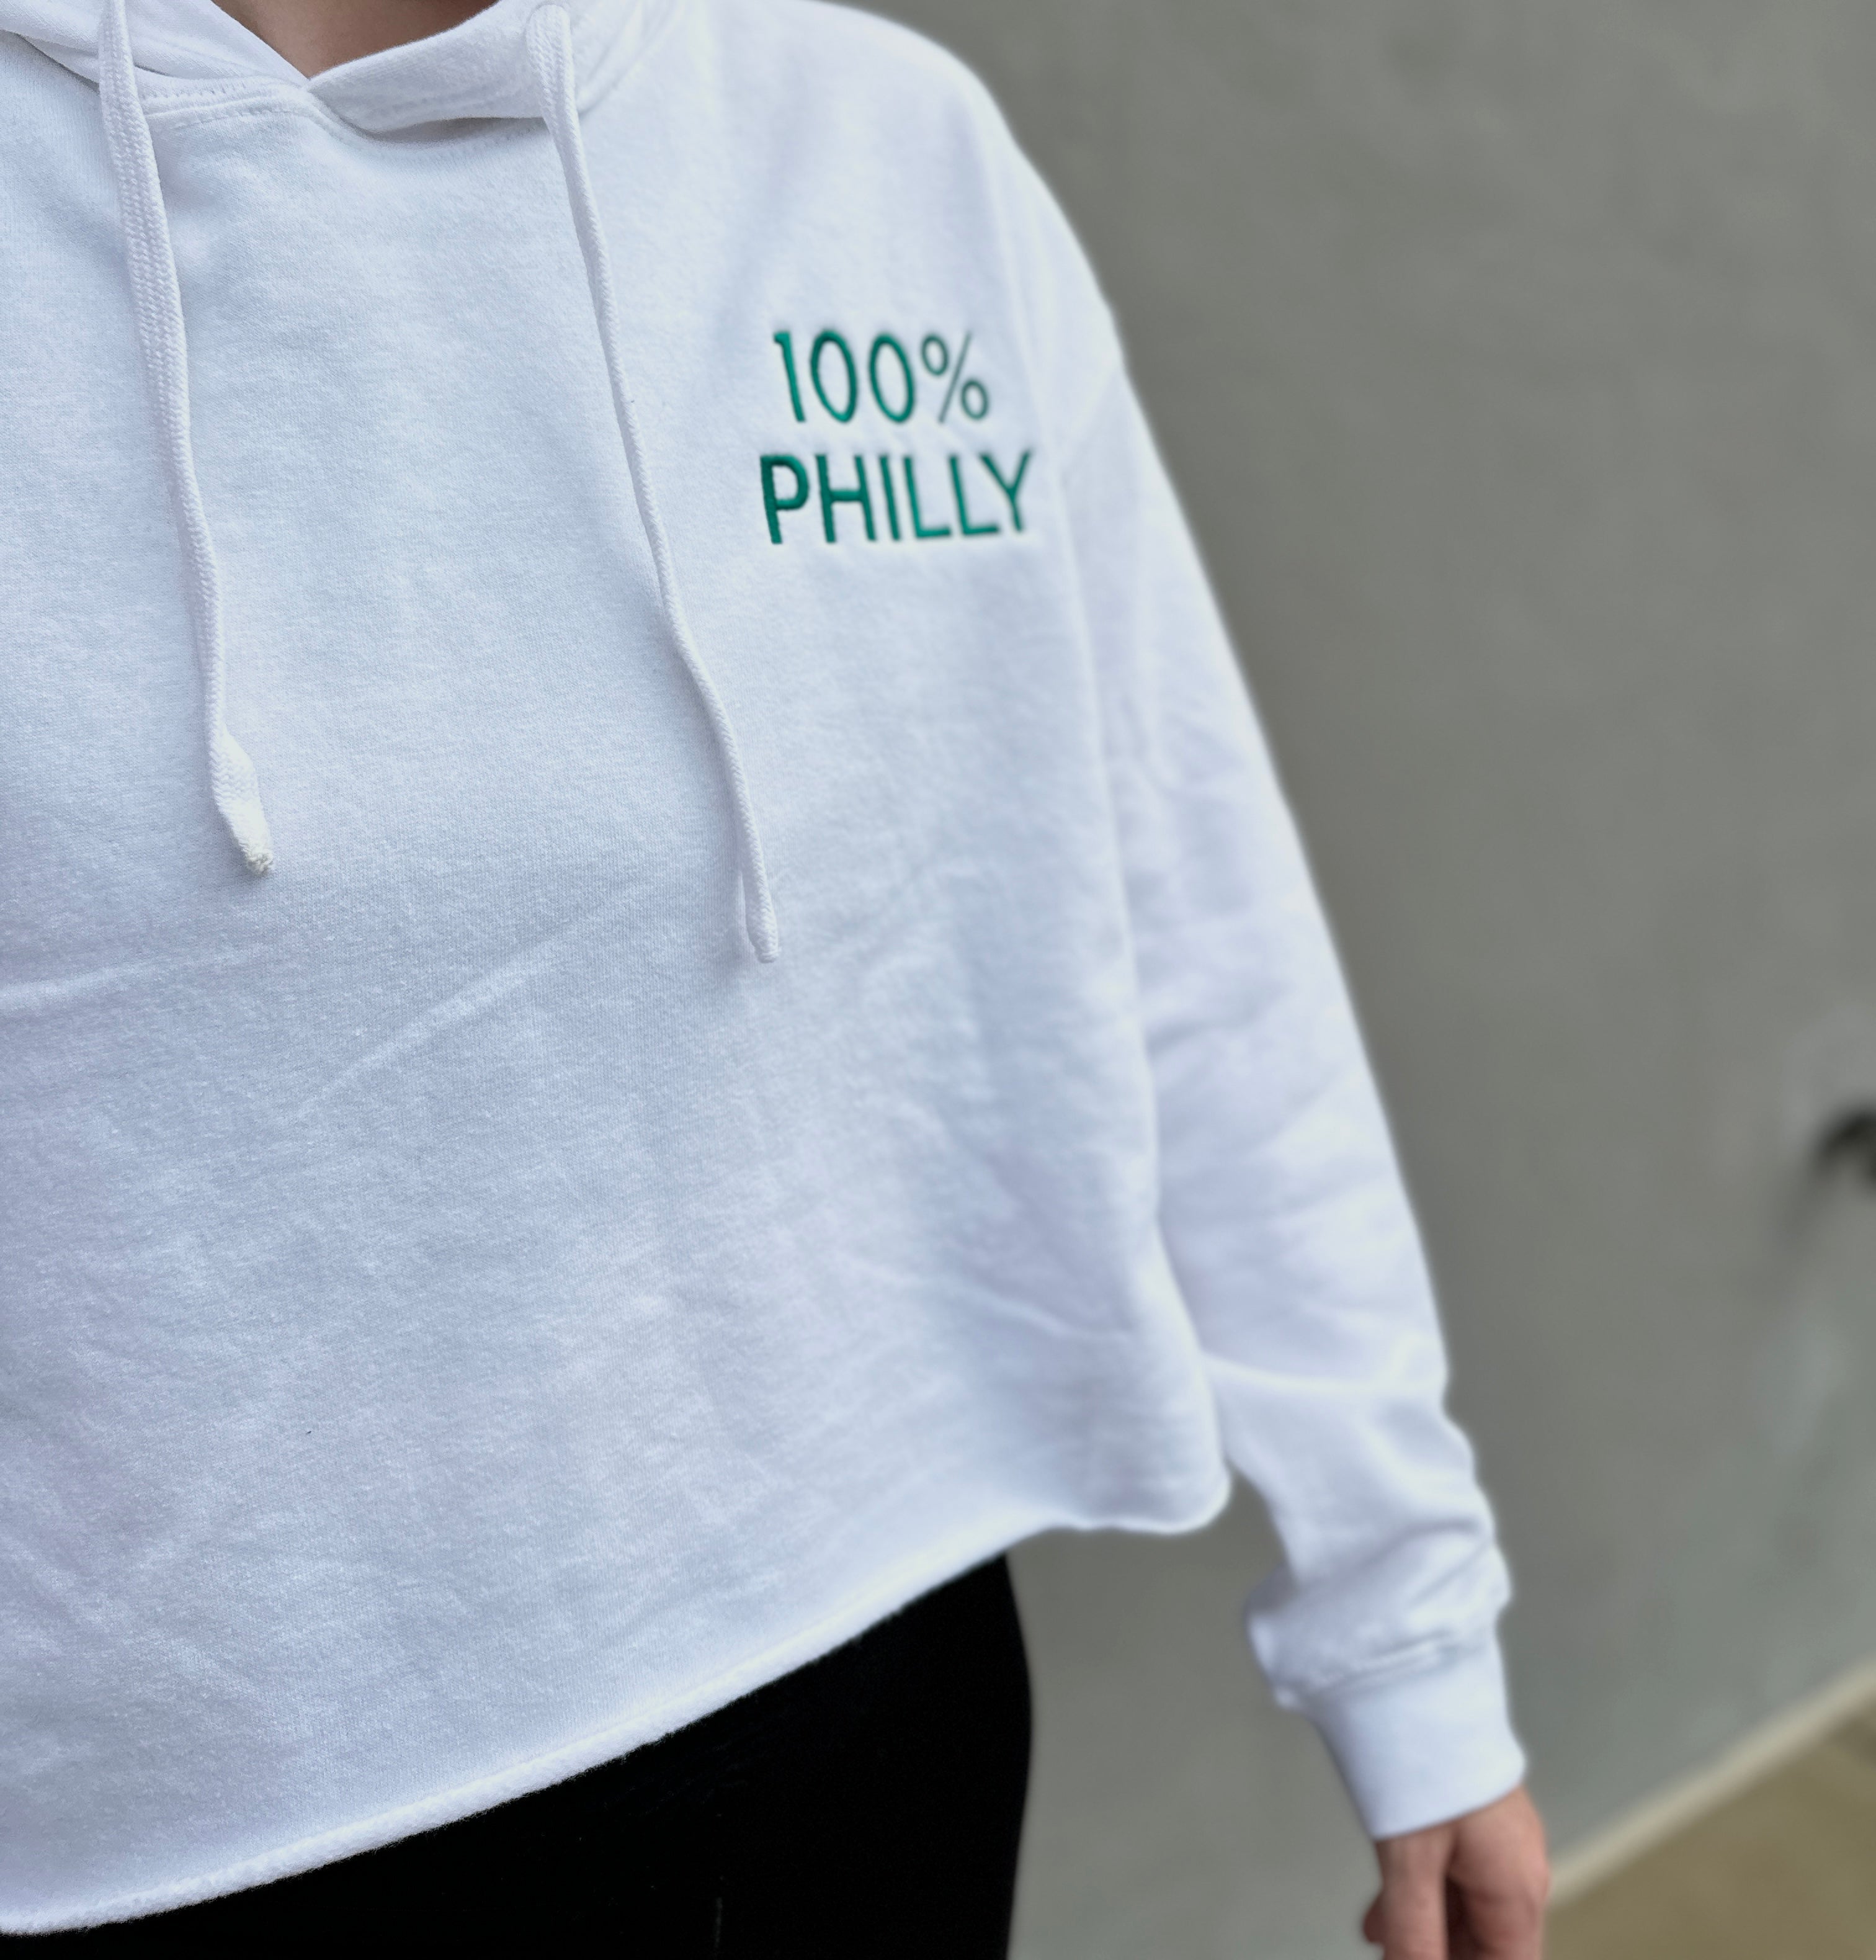 100% Philly Cropped Hoodie